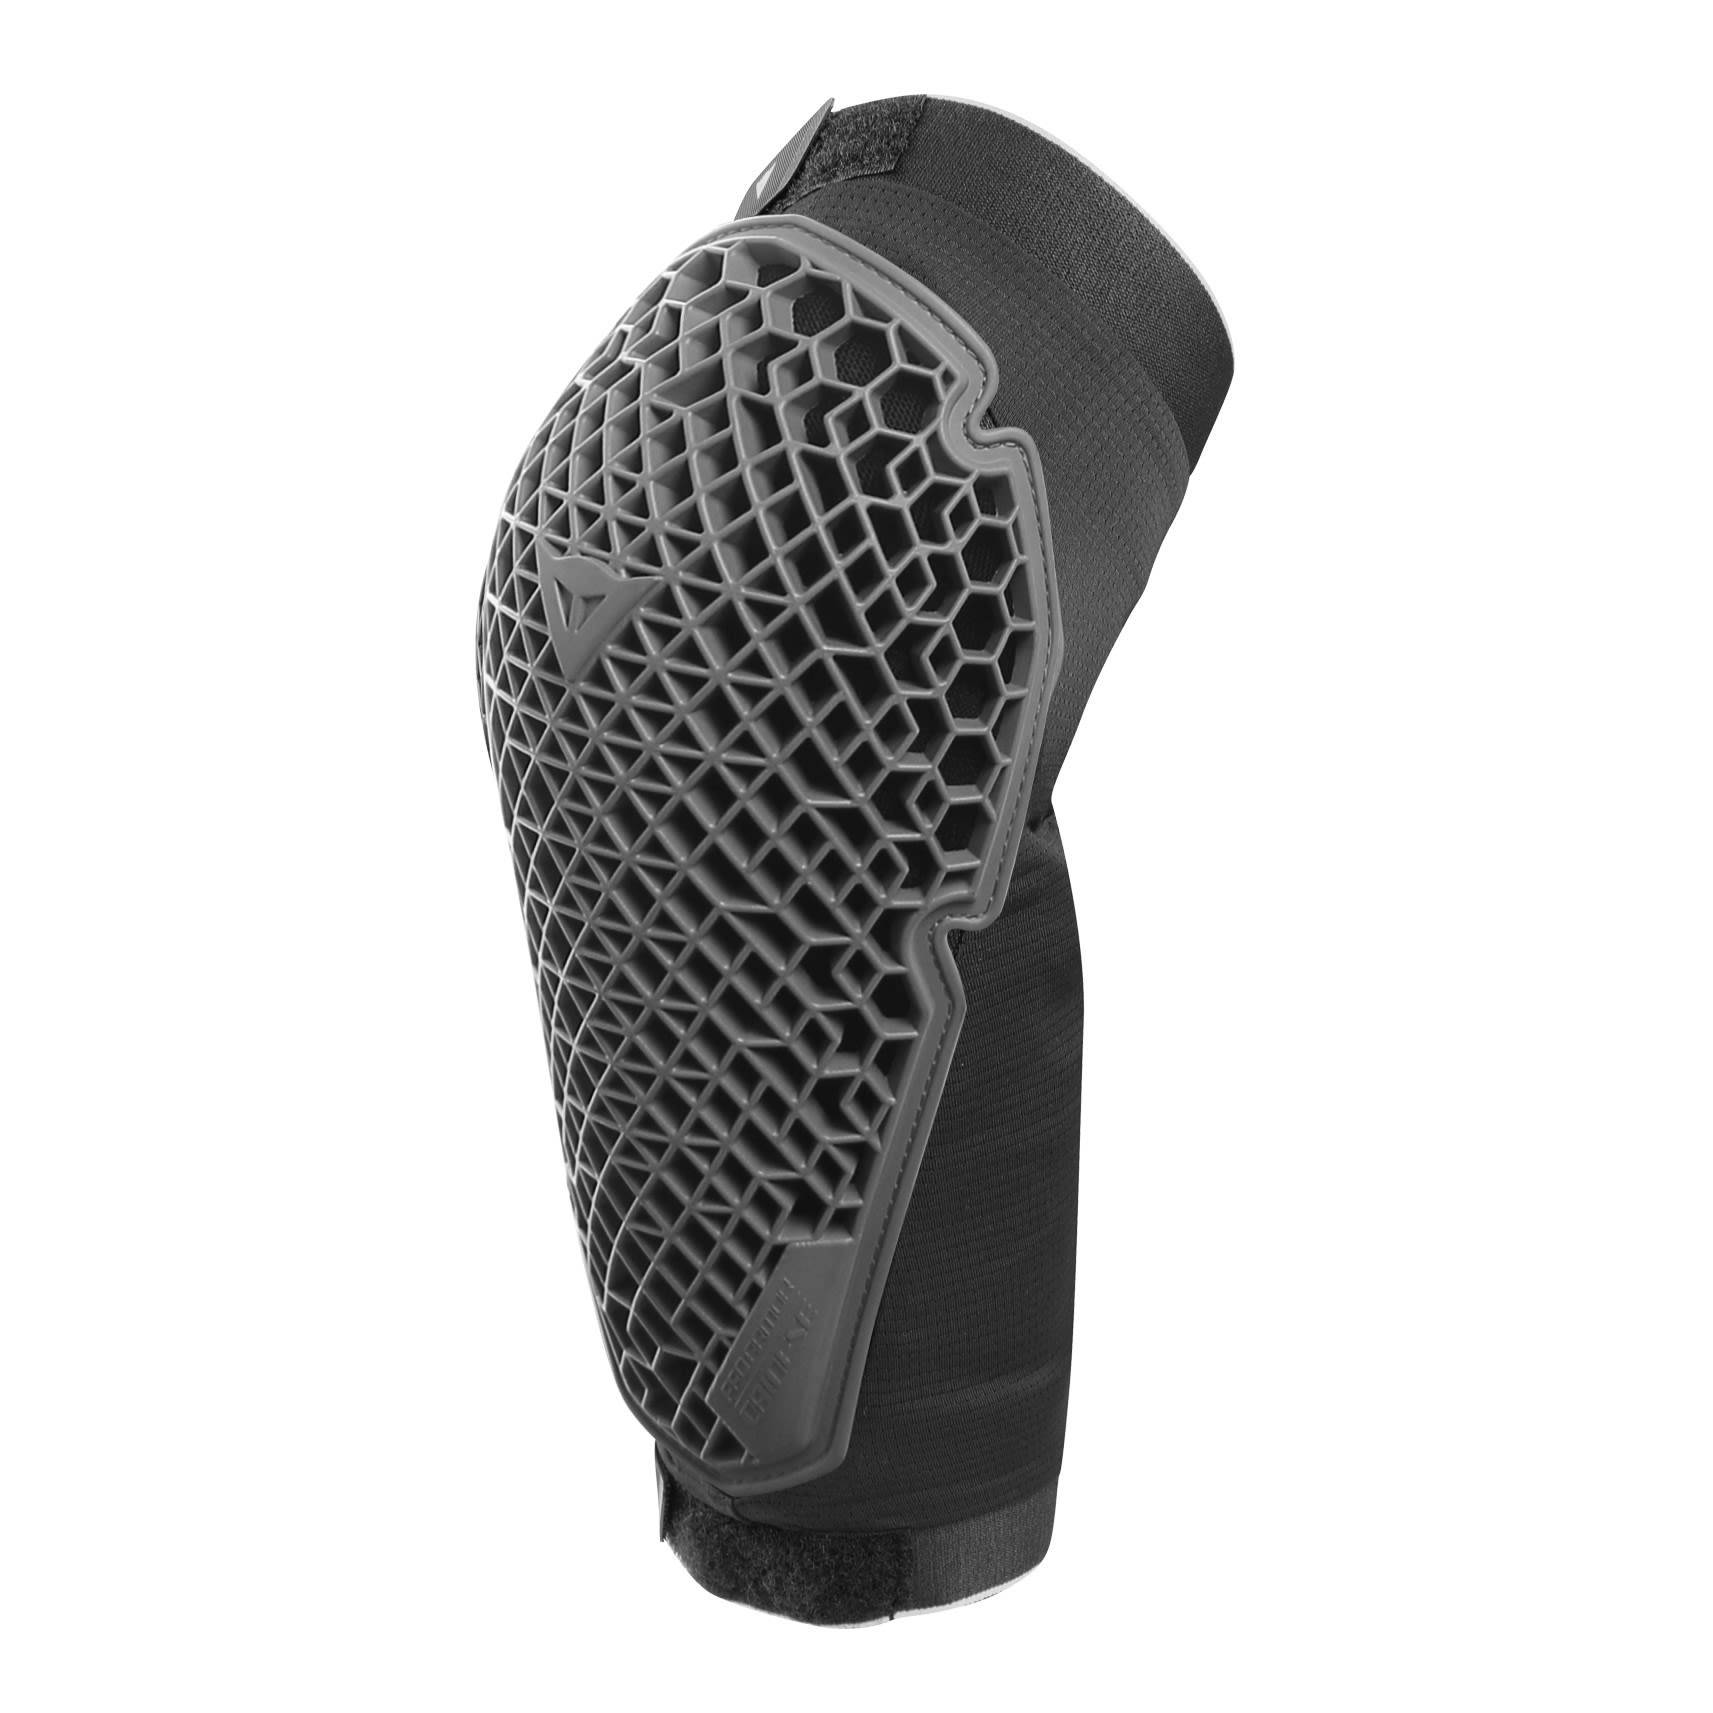 Dainese Pro Amor Elbow Guard